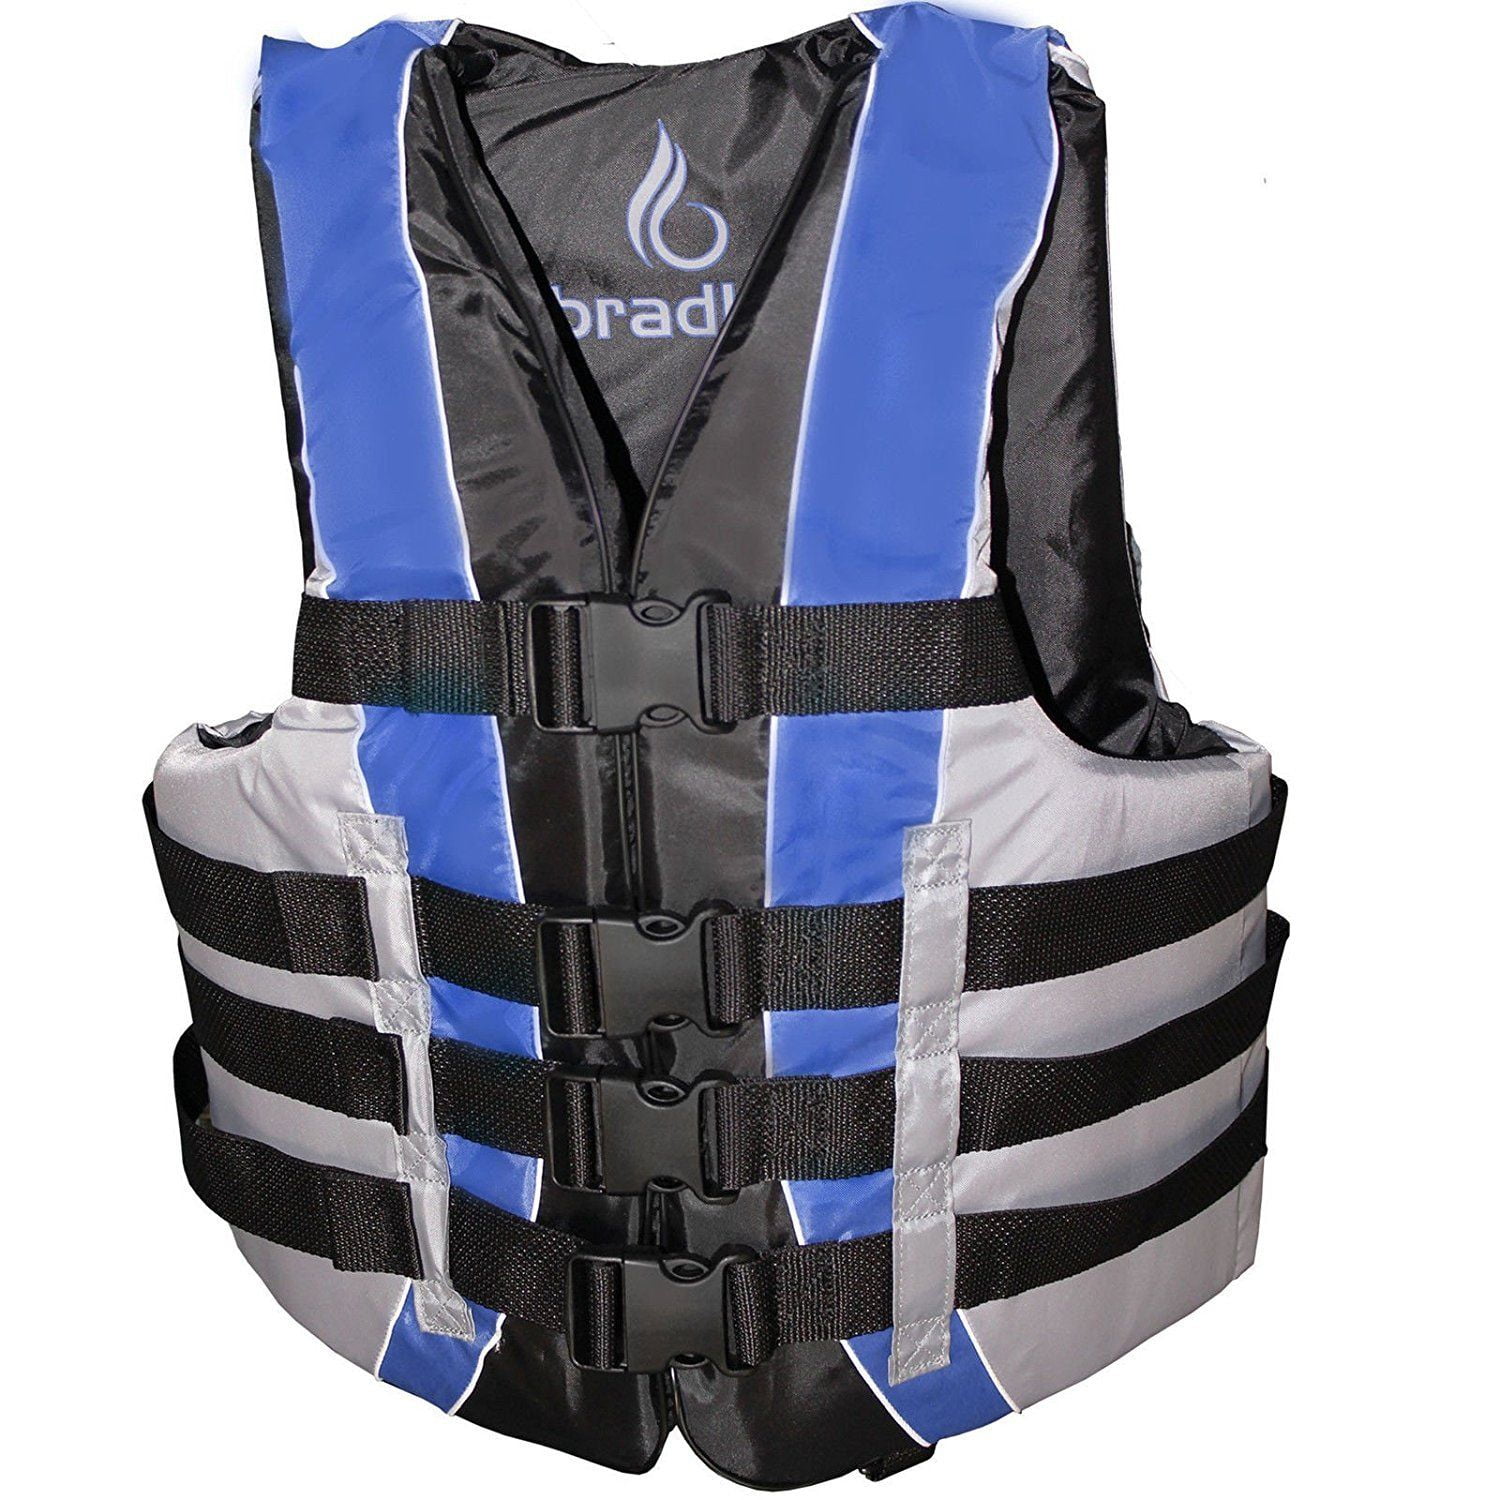 Bradley Bradley life jackets for adults | Marine life vests for adults |  Coast Guard approved life vests and flotation for fishing and hunting